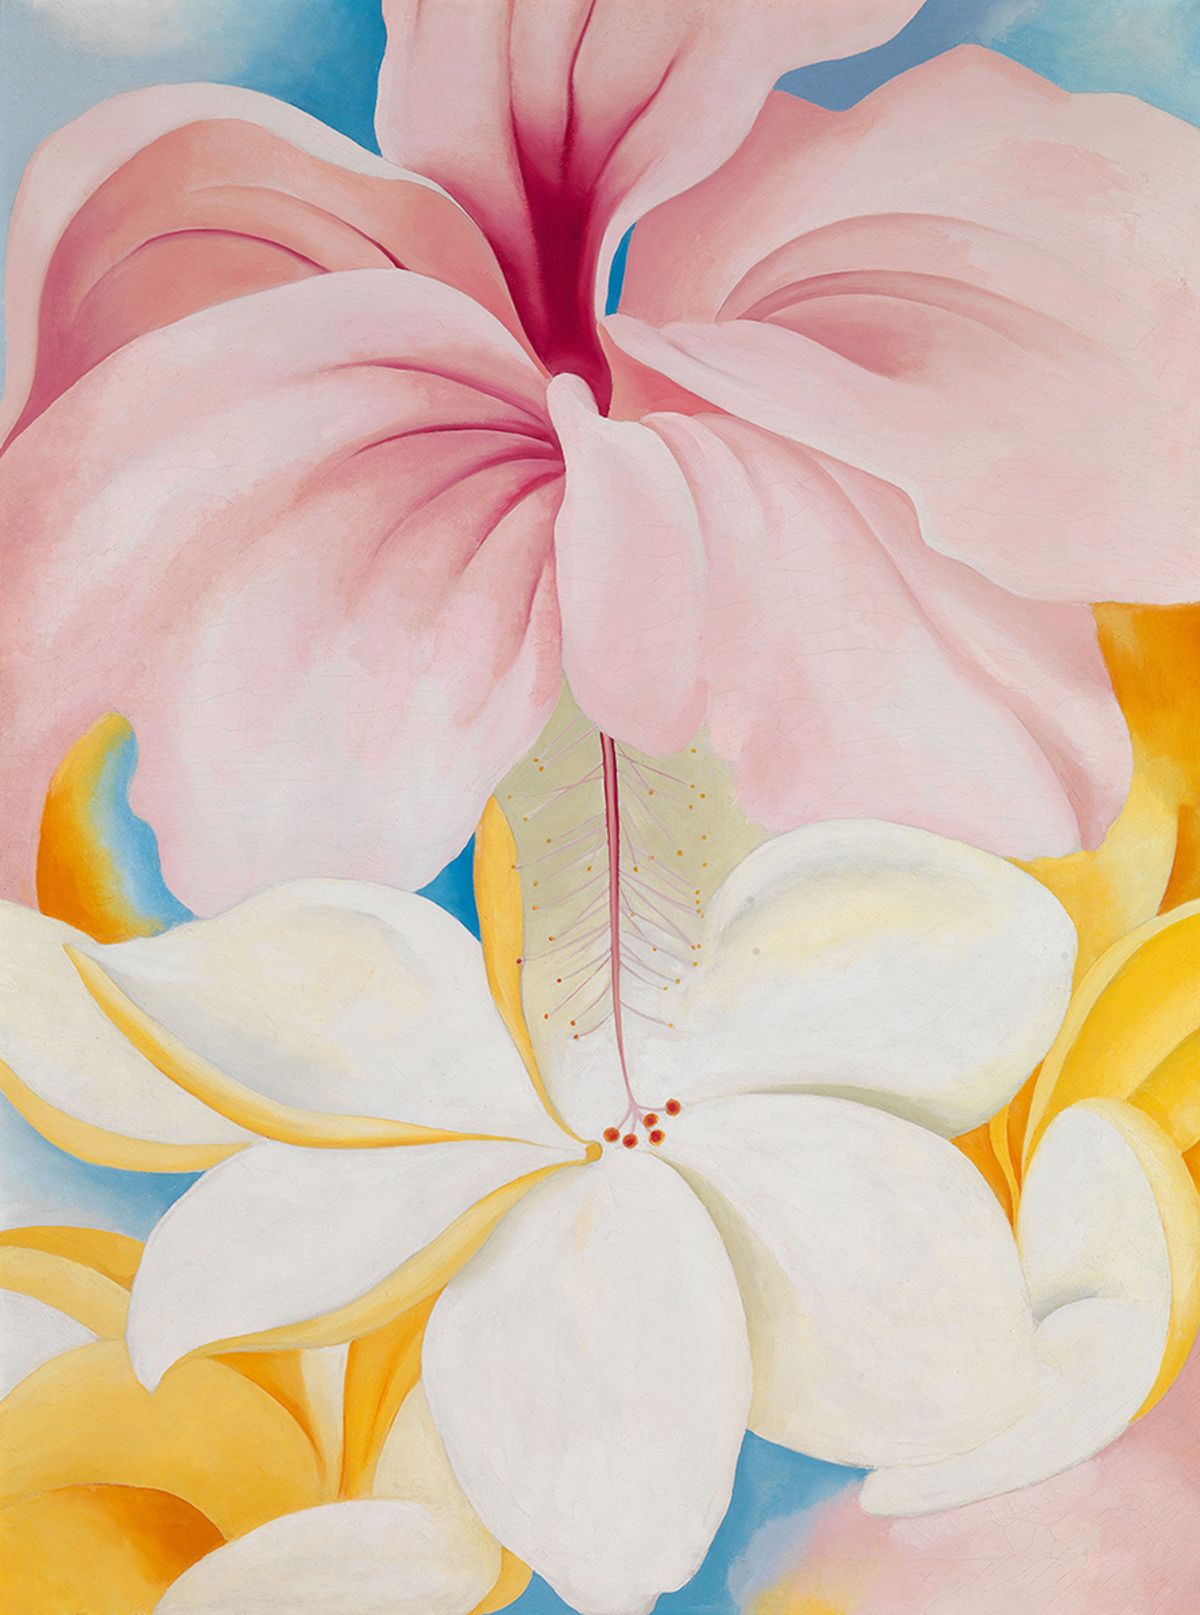 Georgia O’Keeffe, Hibiscus with Plumeria (1939) 2018 Georgia O’Keeffe Museum  /  Artists Rights Society (ARS),  New York